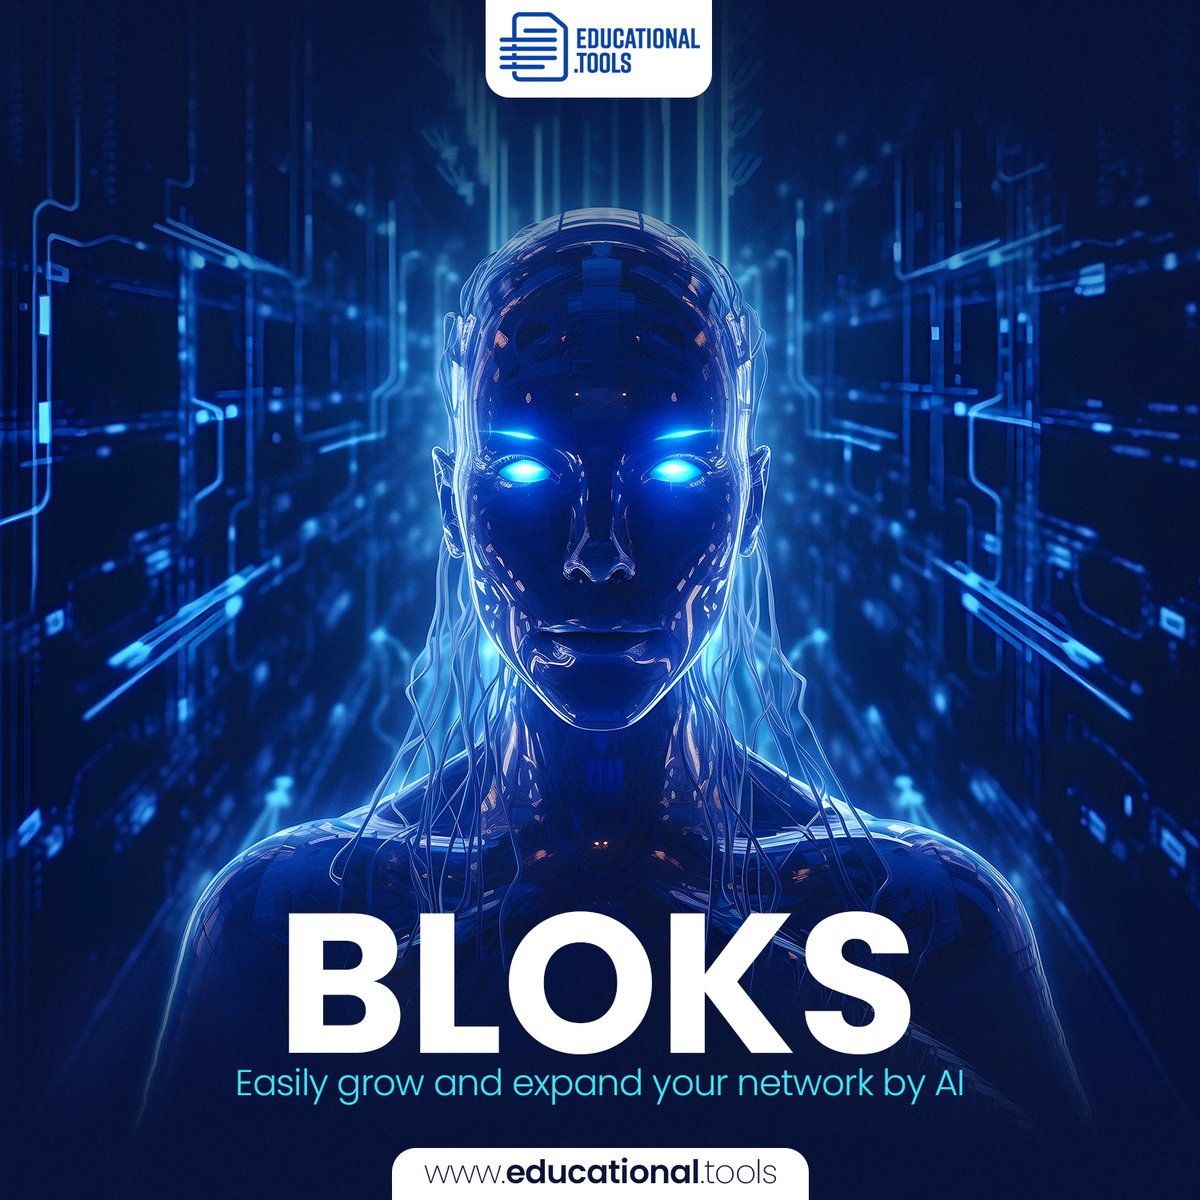 Bloks: AI-powered networking! Say goodbye to disorganized notes & hello to effortless connection building.
Know more about Bloks: educational.tools/bloks-the-ai-a…

#Bloks #Networking #AI #ProfessionalConnections #BusinessDevelopment #OpportunityManagement